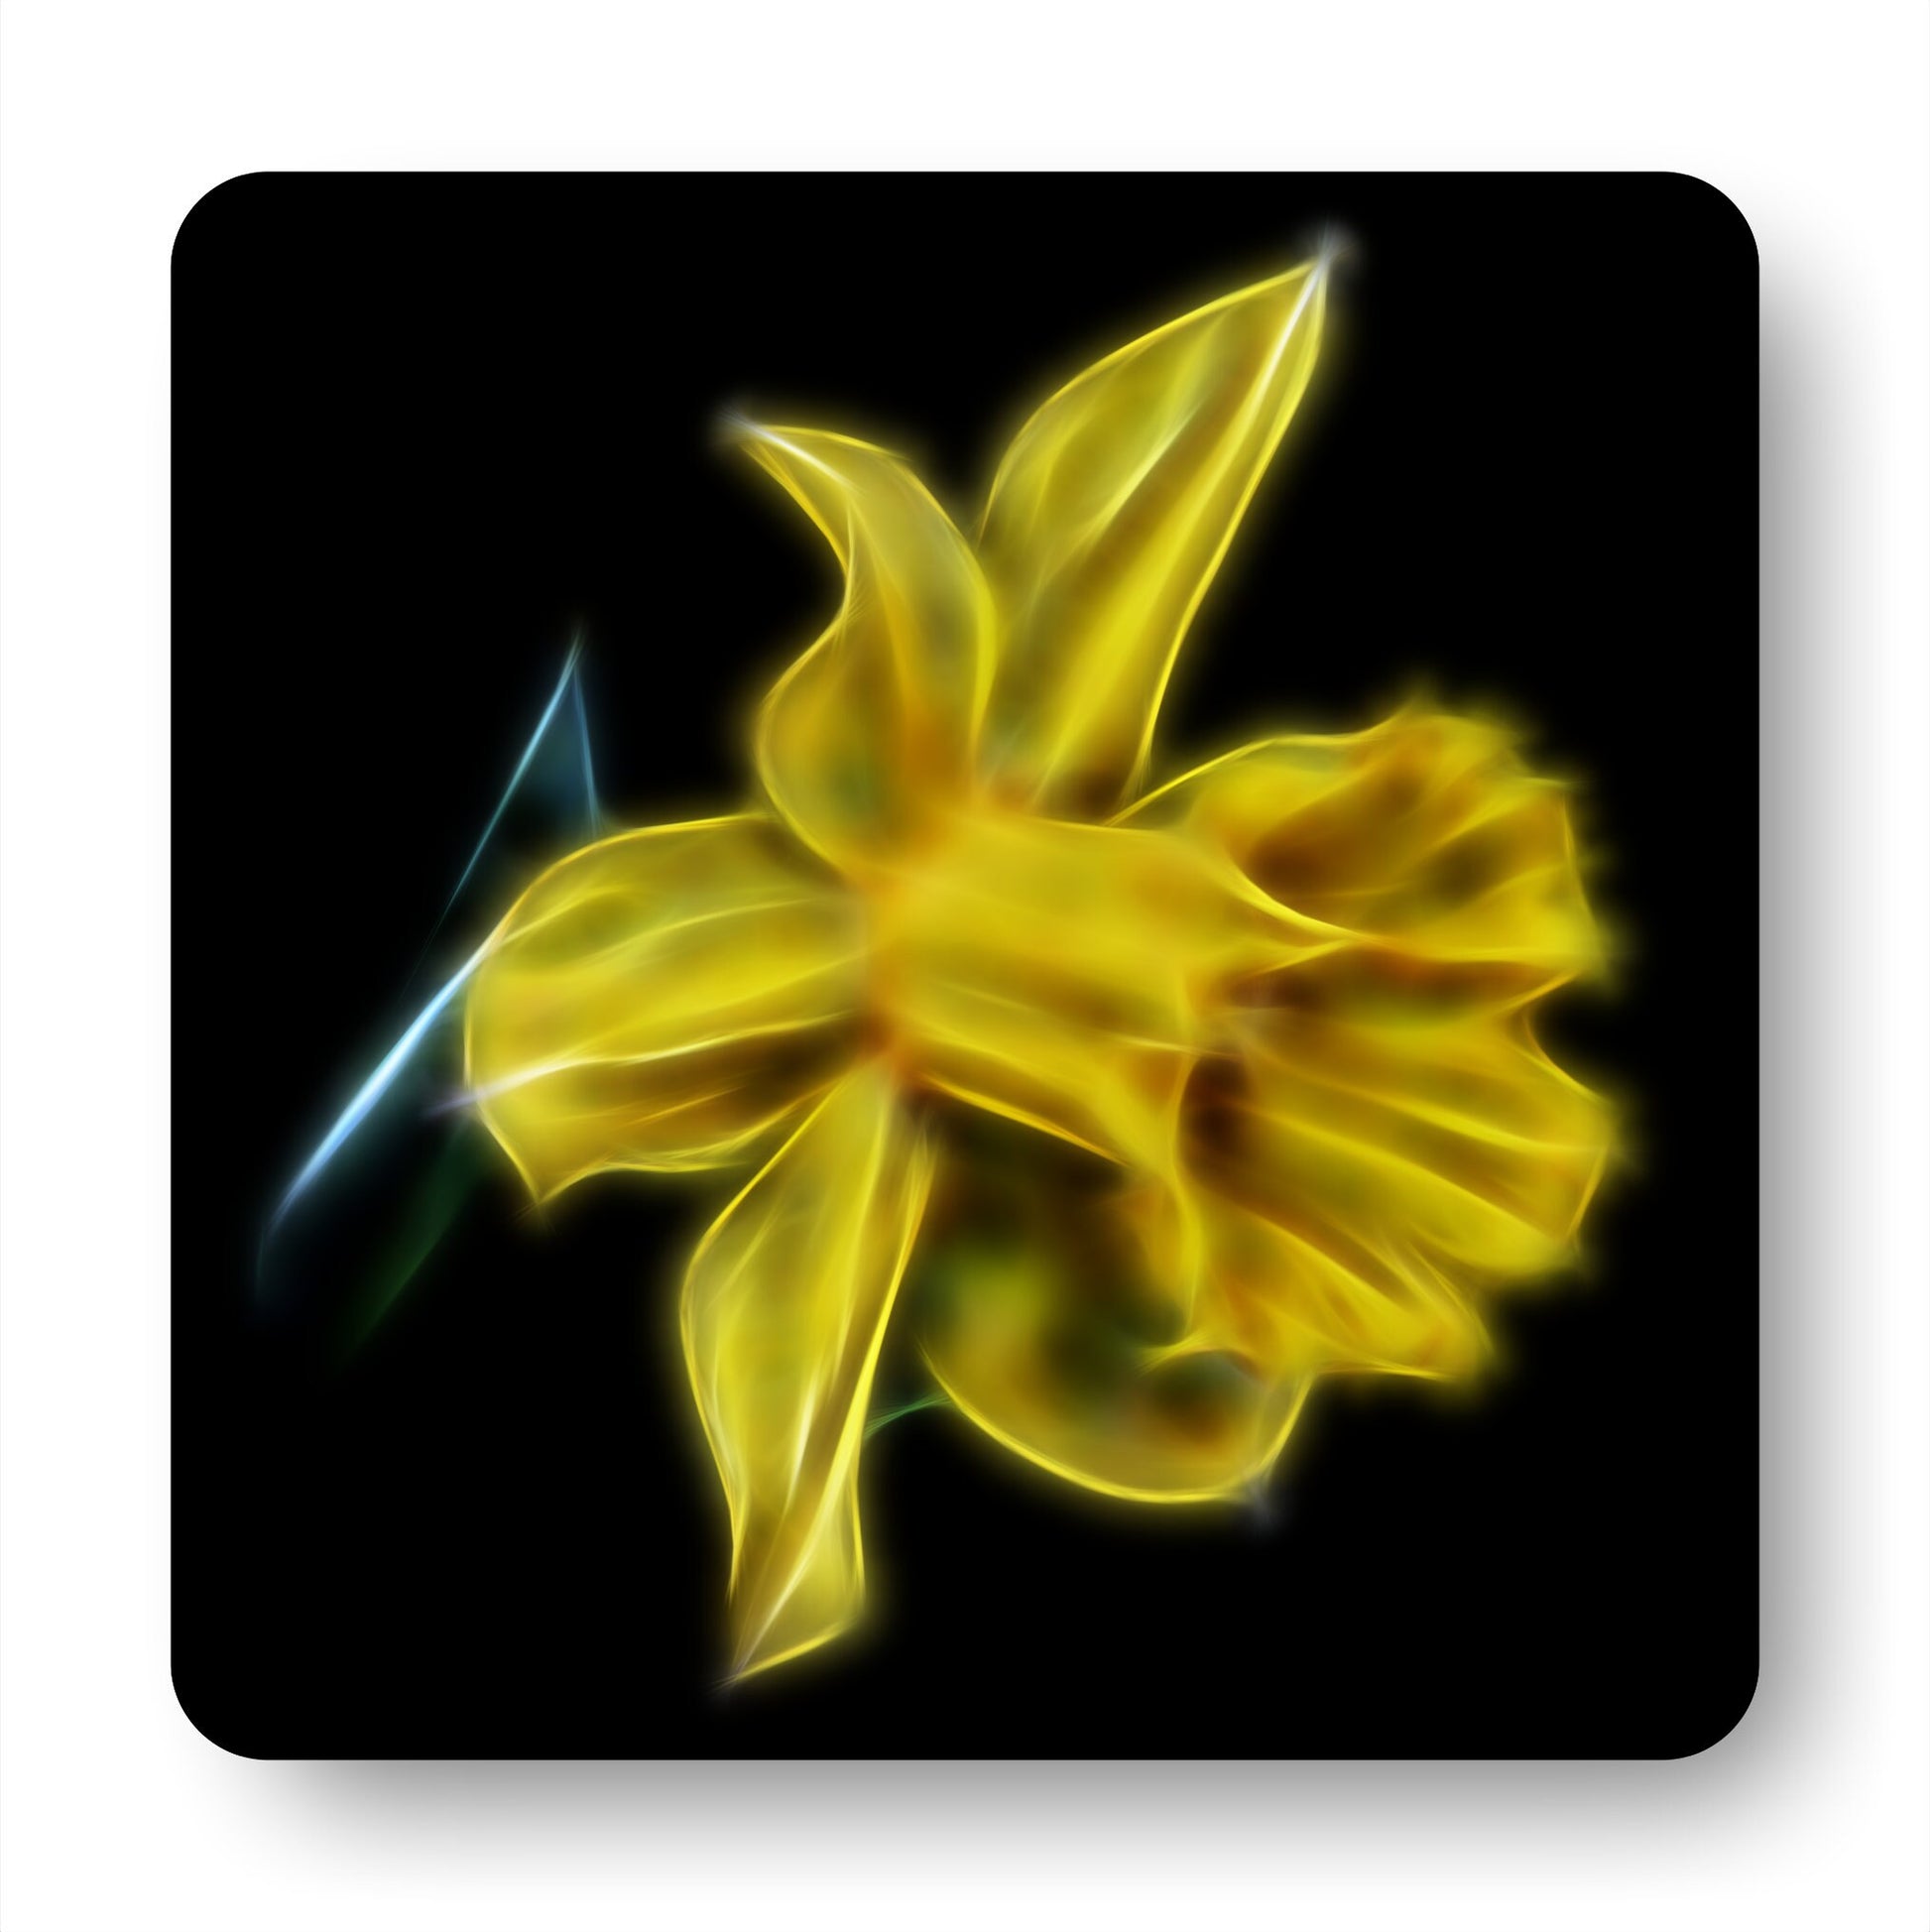 Daffodil Coasters with Stunning Fractal Art Design.